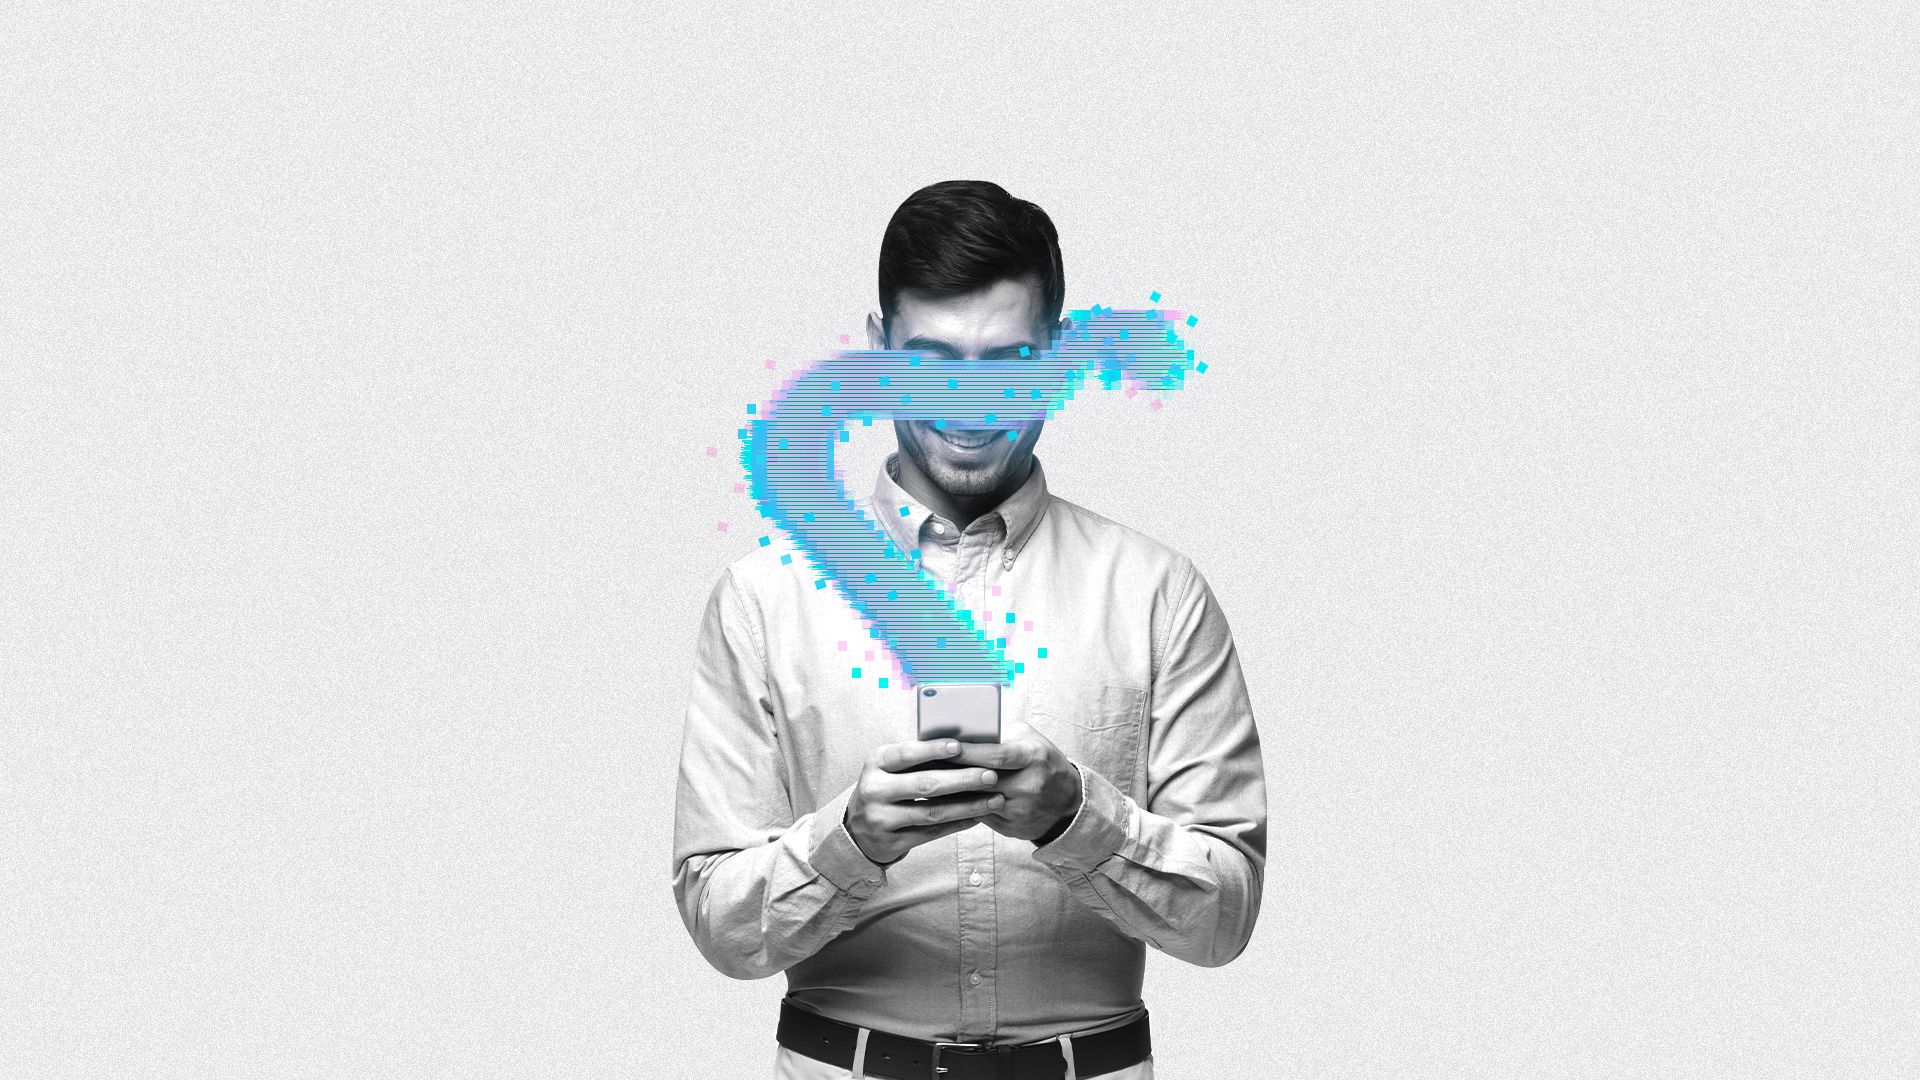 Illustration of a man looking at a phone, with a digital projection coming from the screen and covering his eyes like it's a blindfold